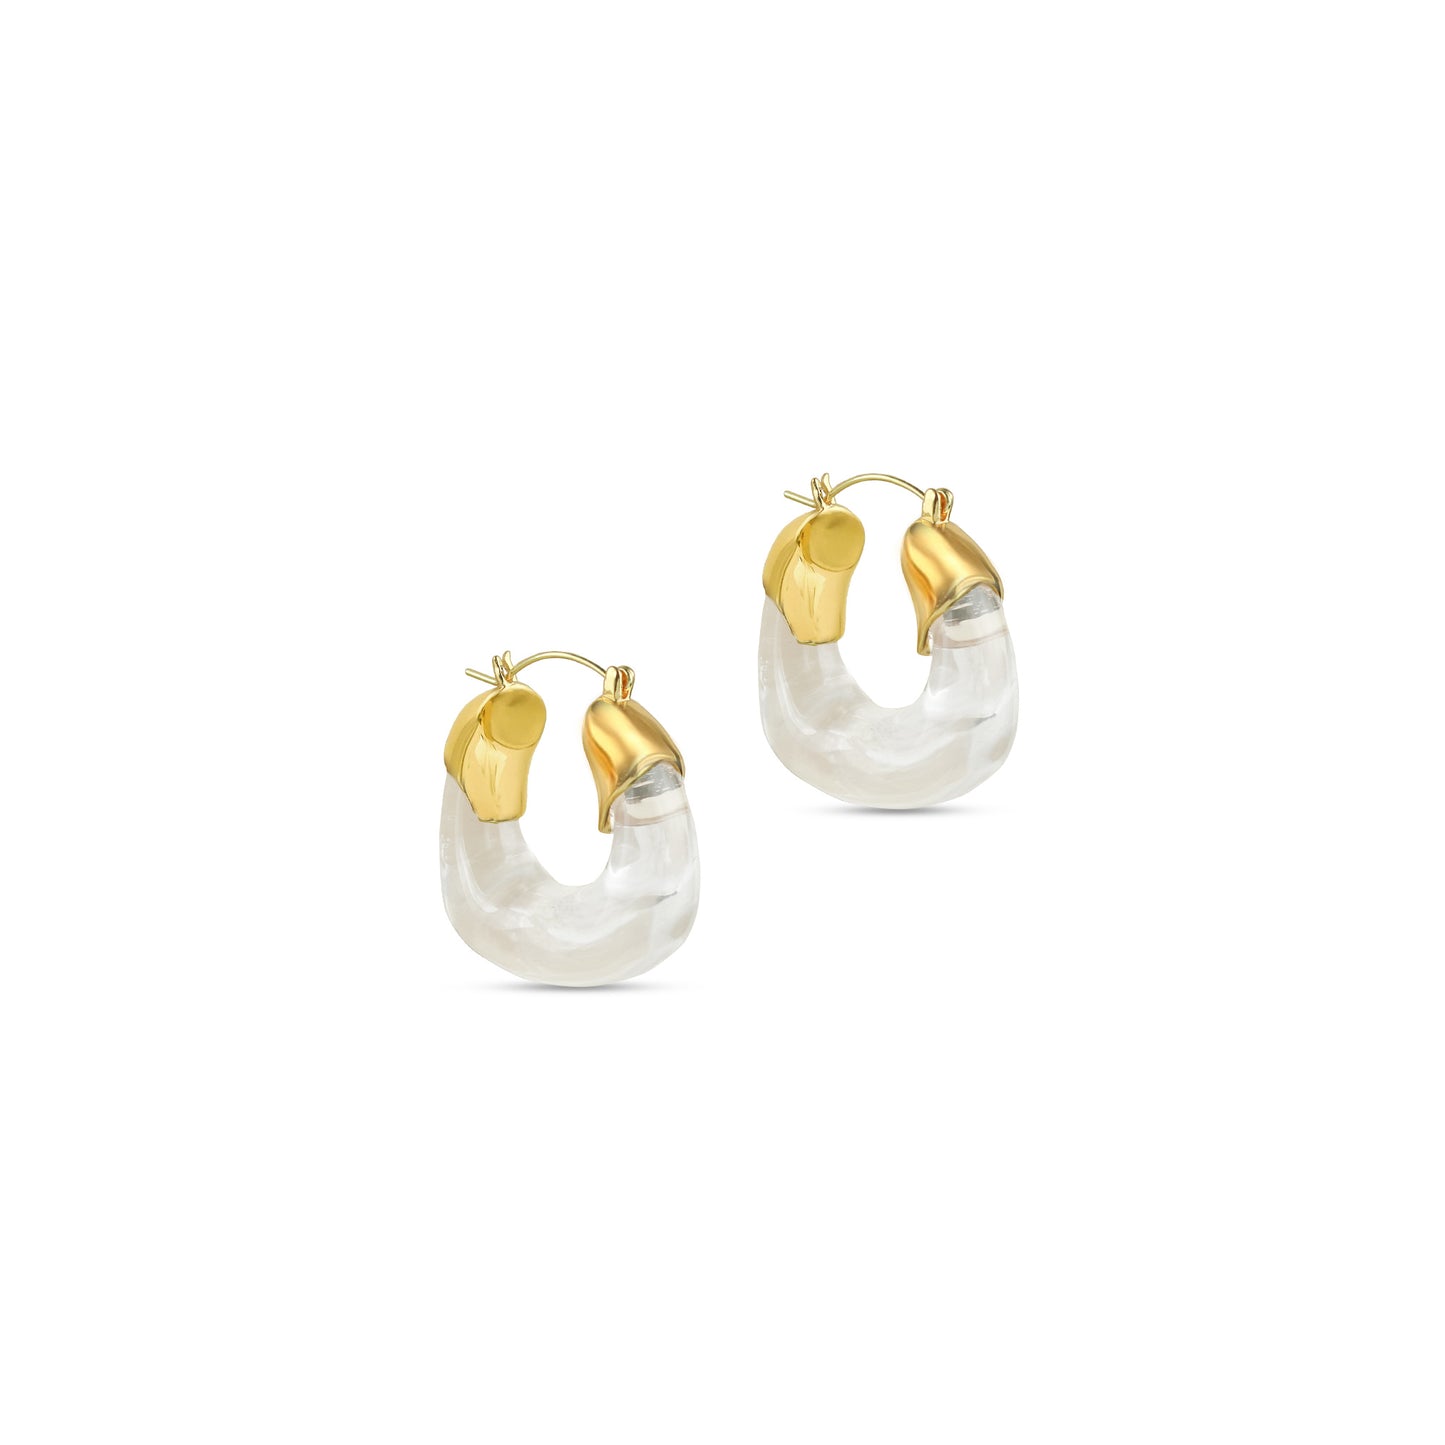 The Mabel Lucite Earrings